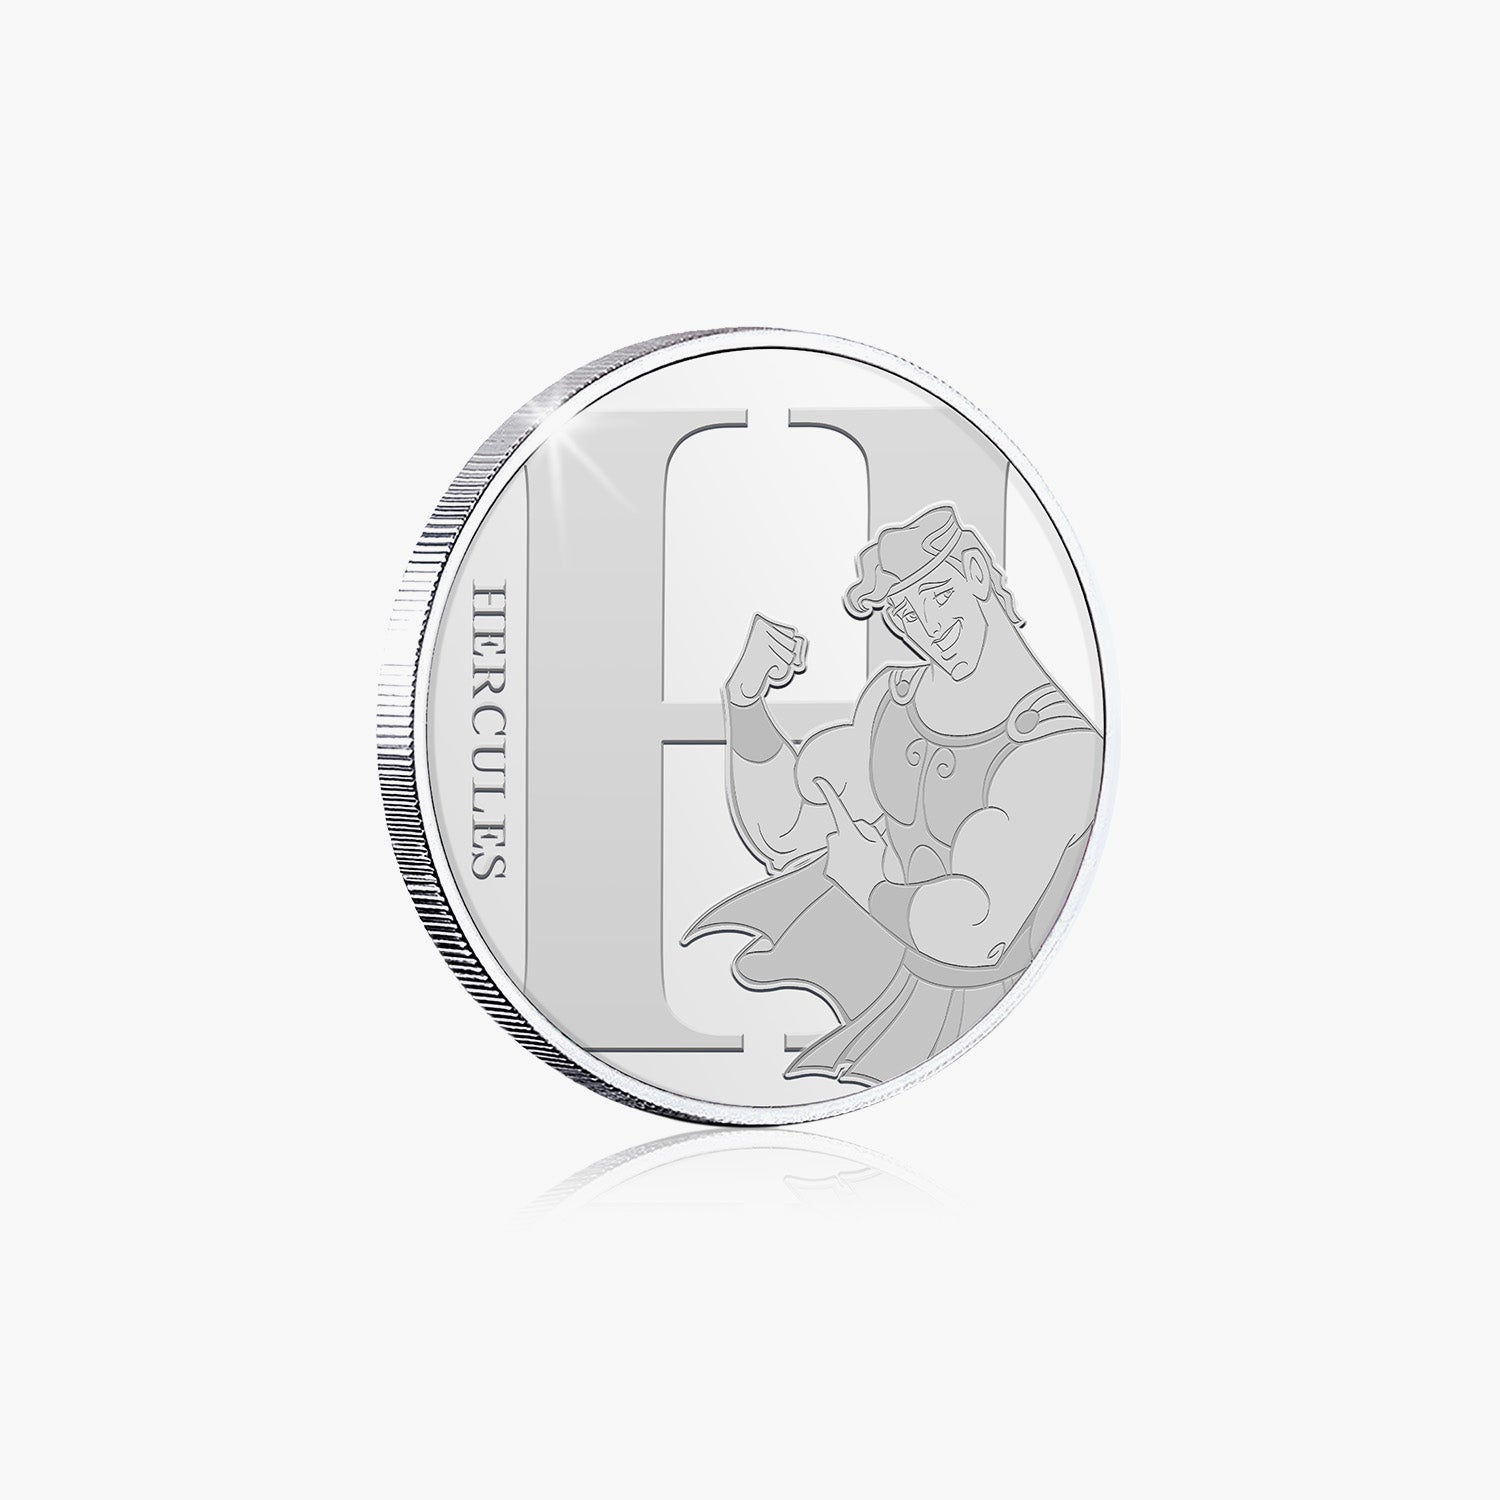 H is For Hercules Silver-Plated Commemorative